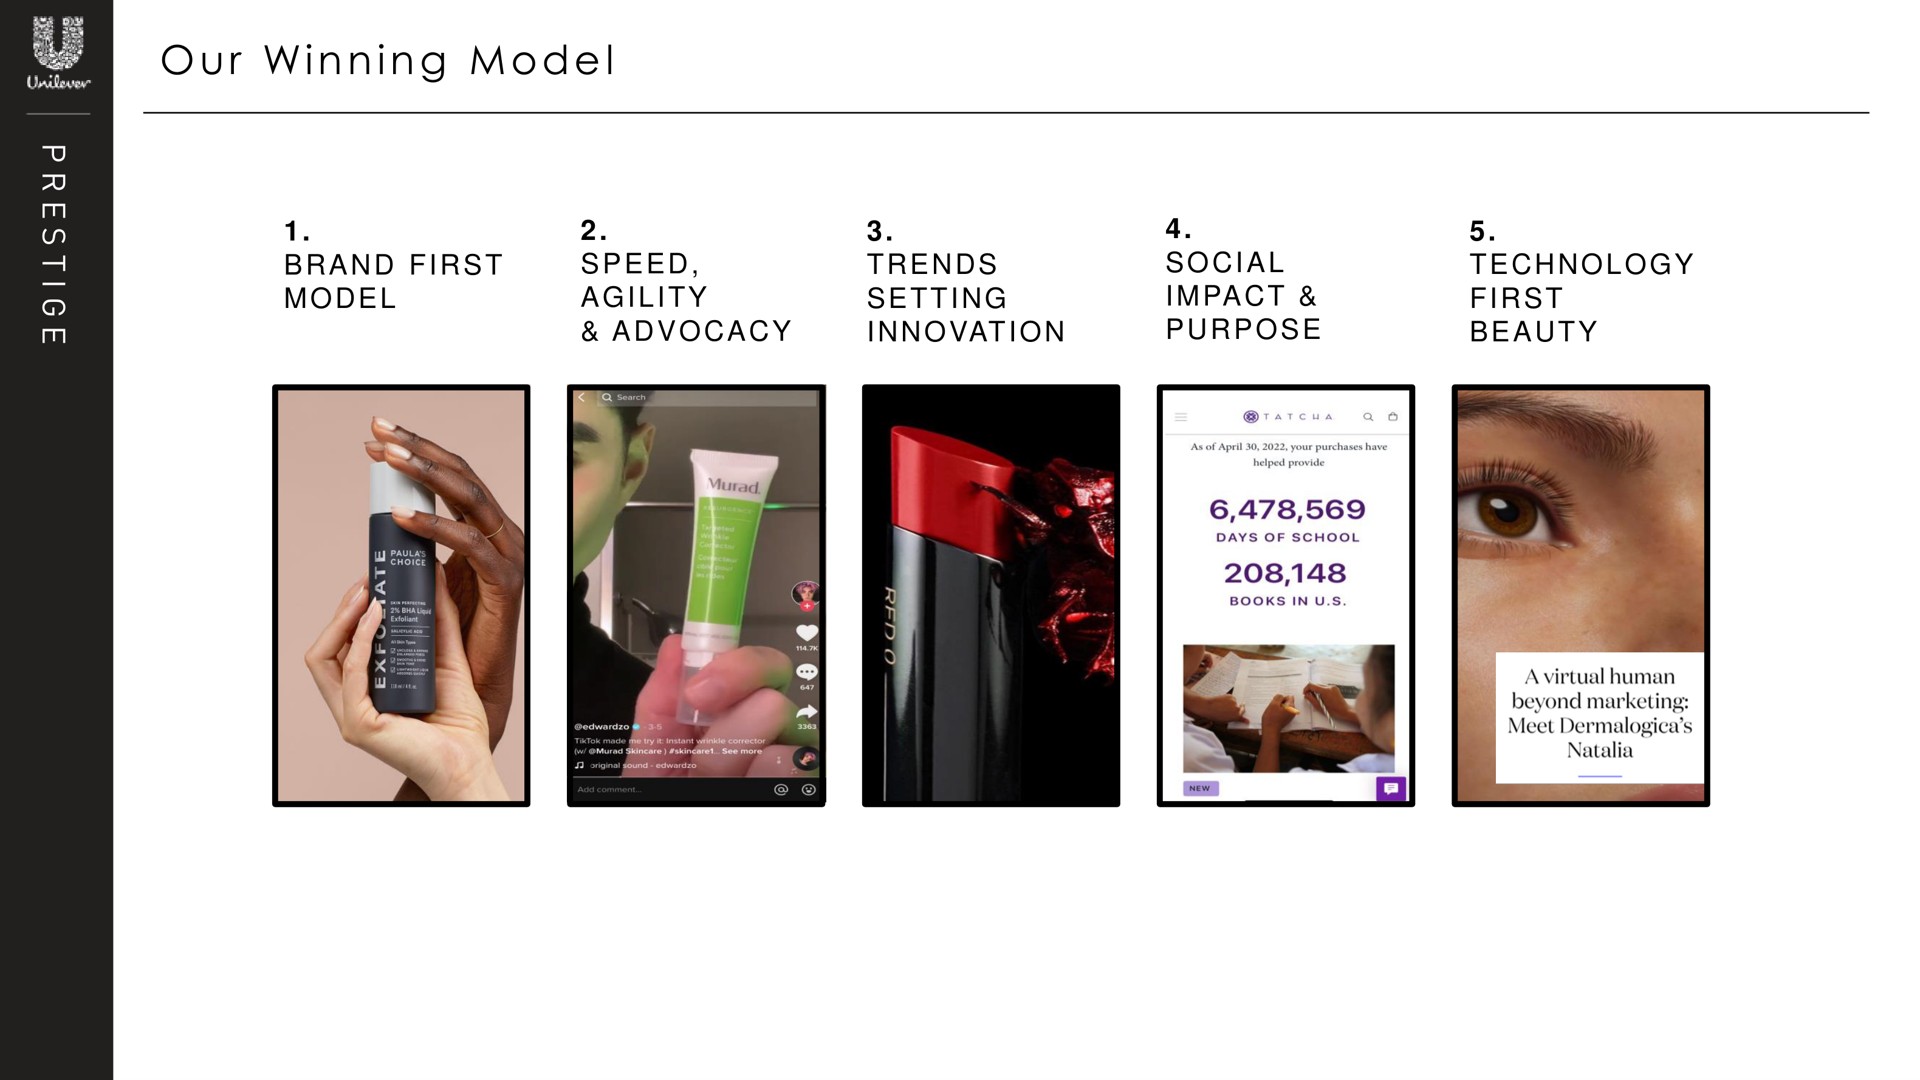 i our winning model technology first beauty speed agility advocacy trends setting innovation brand first model social impact purpose | Unilever